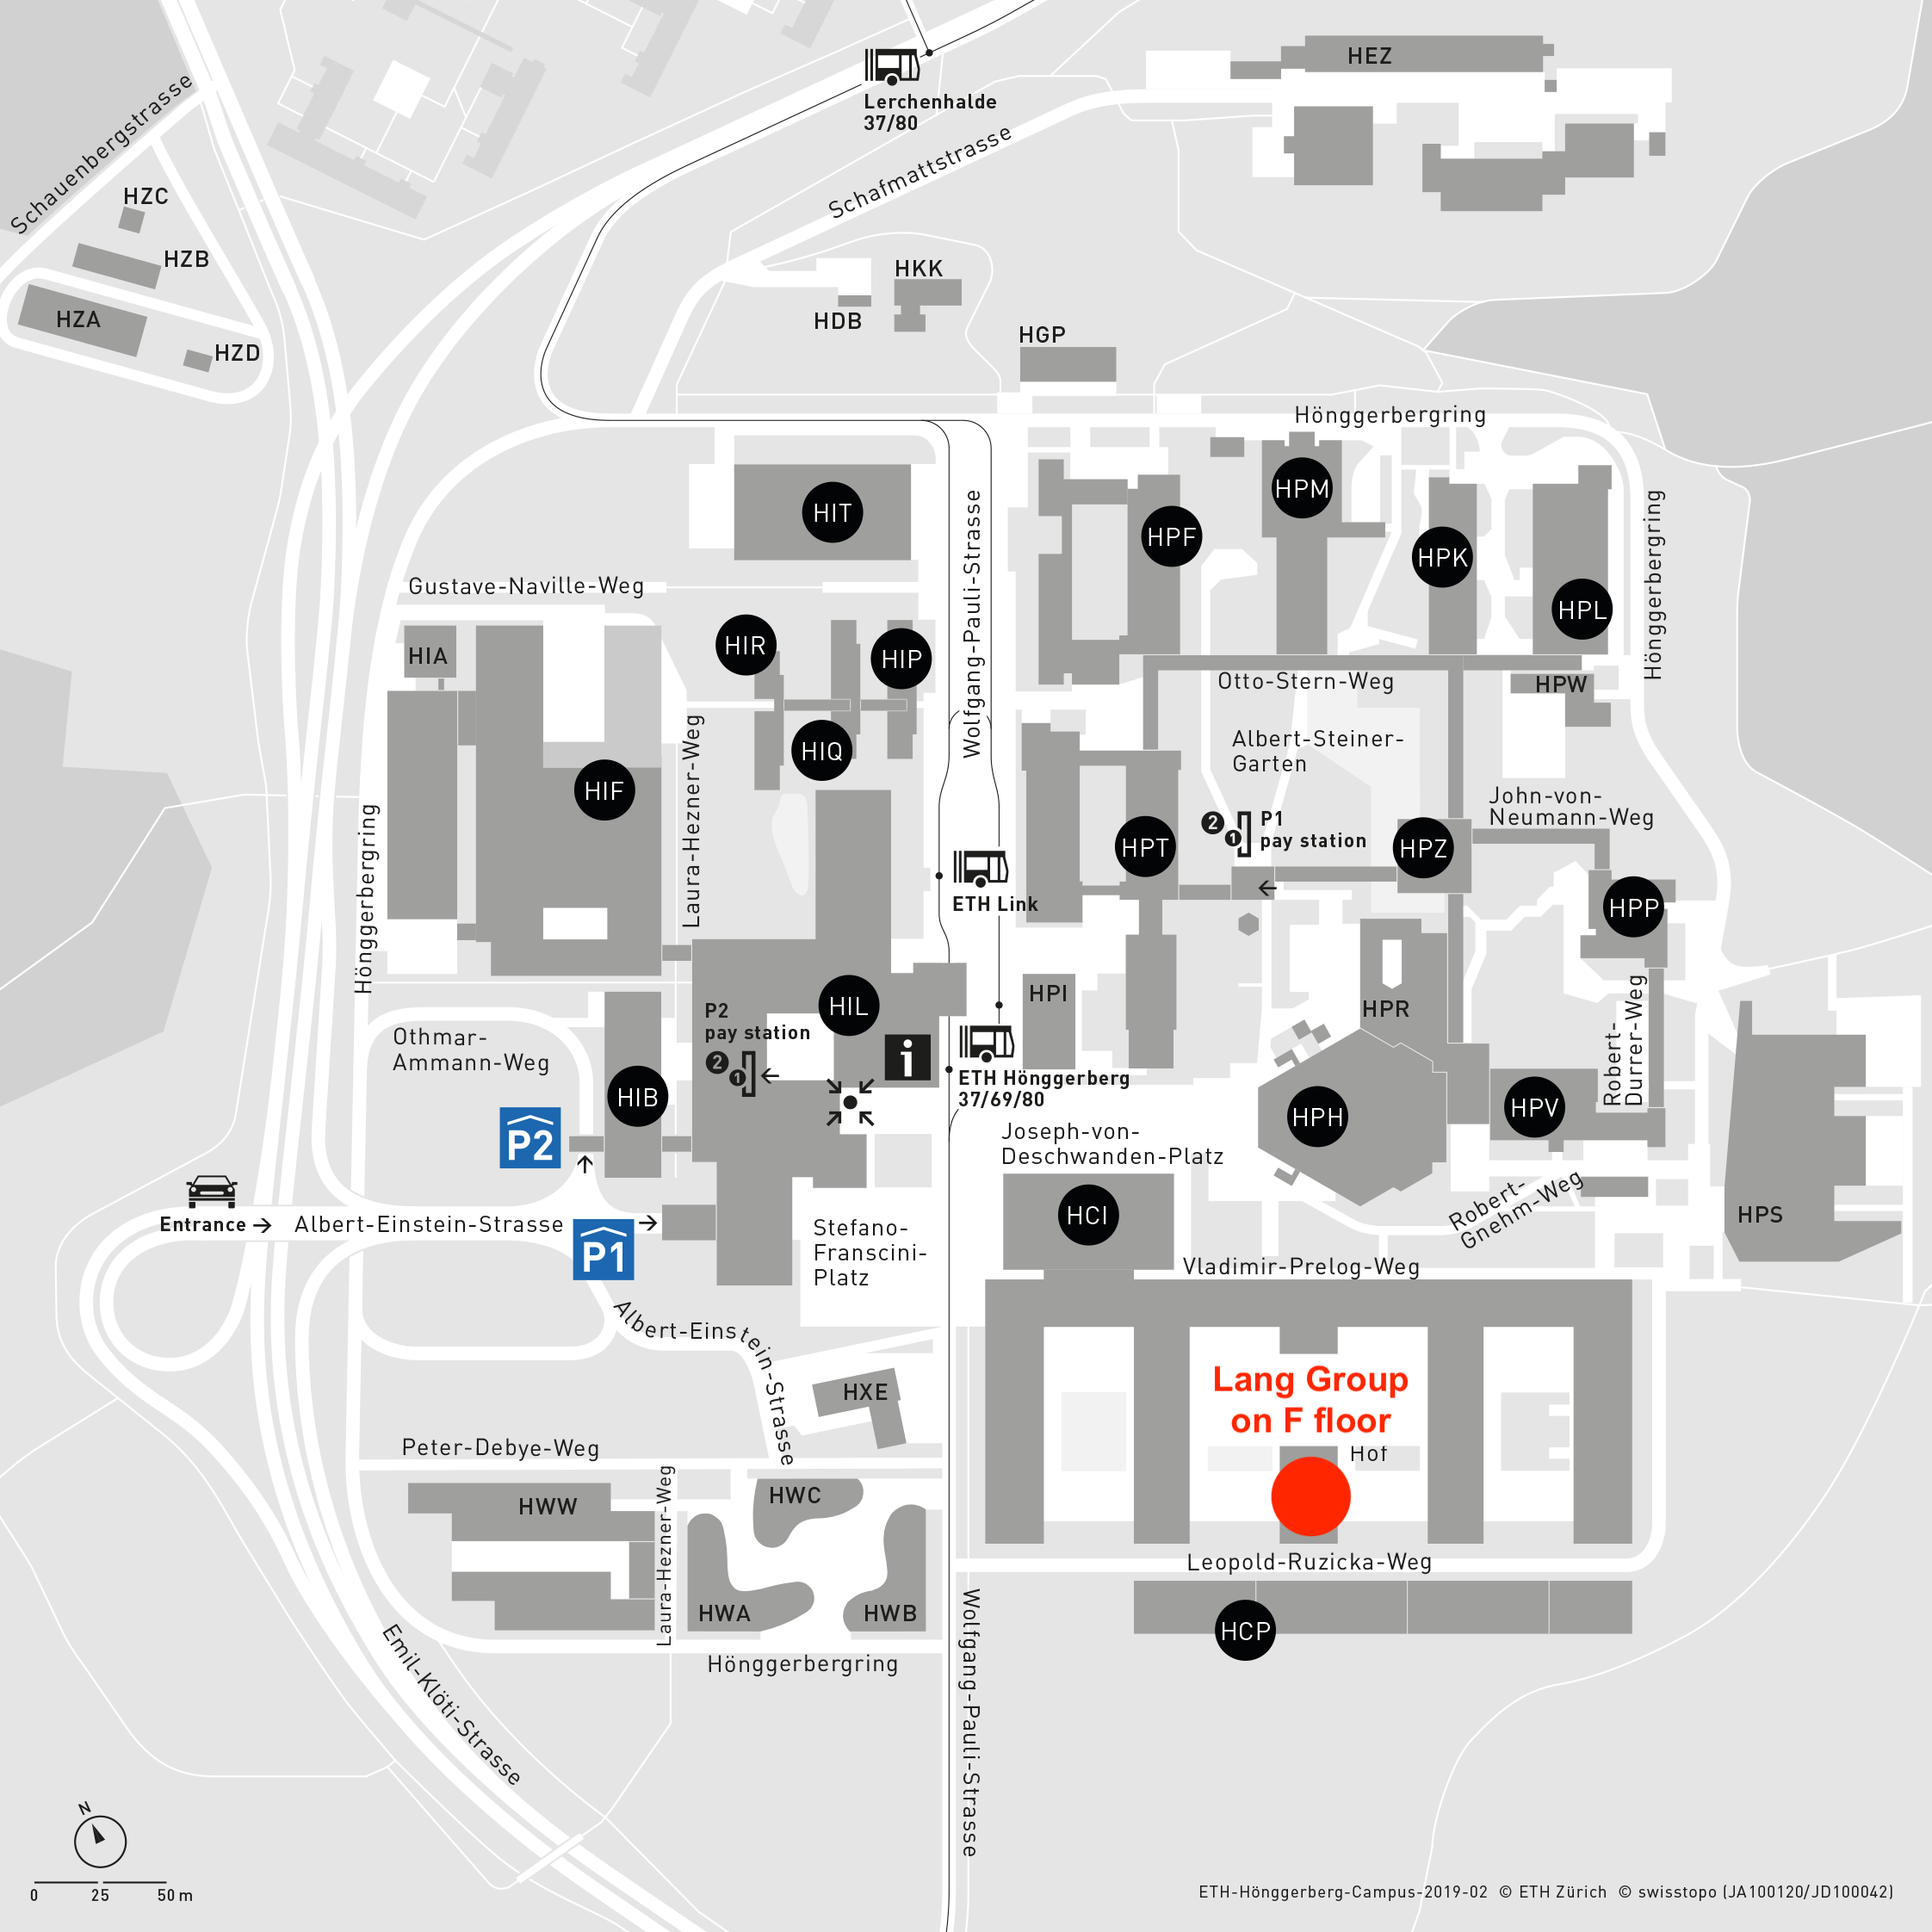 area plan of campus ETH Hönggerberg, red dot on third finger of HCI building